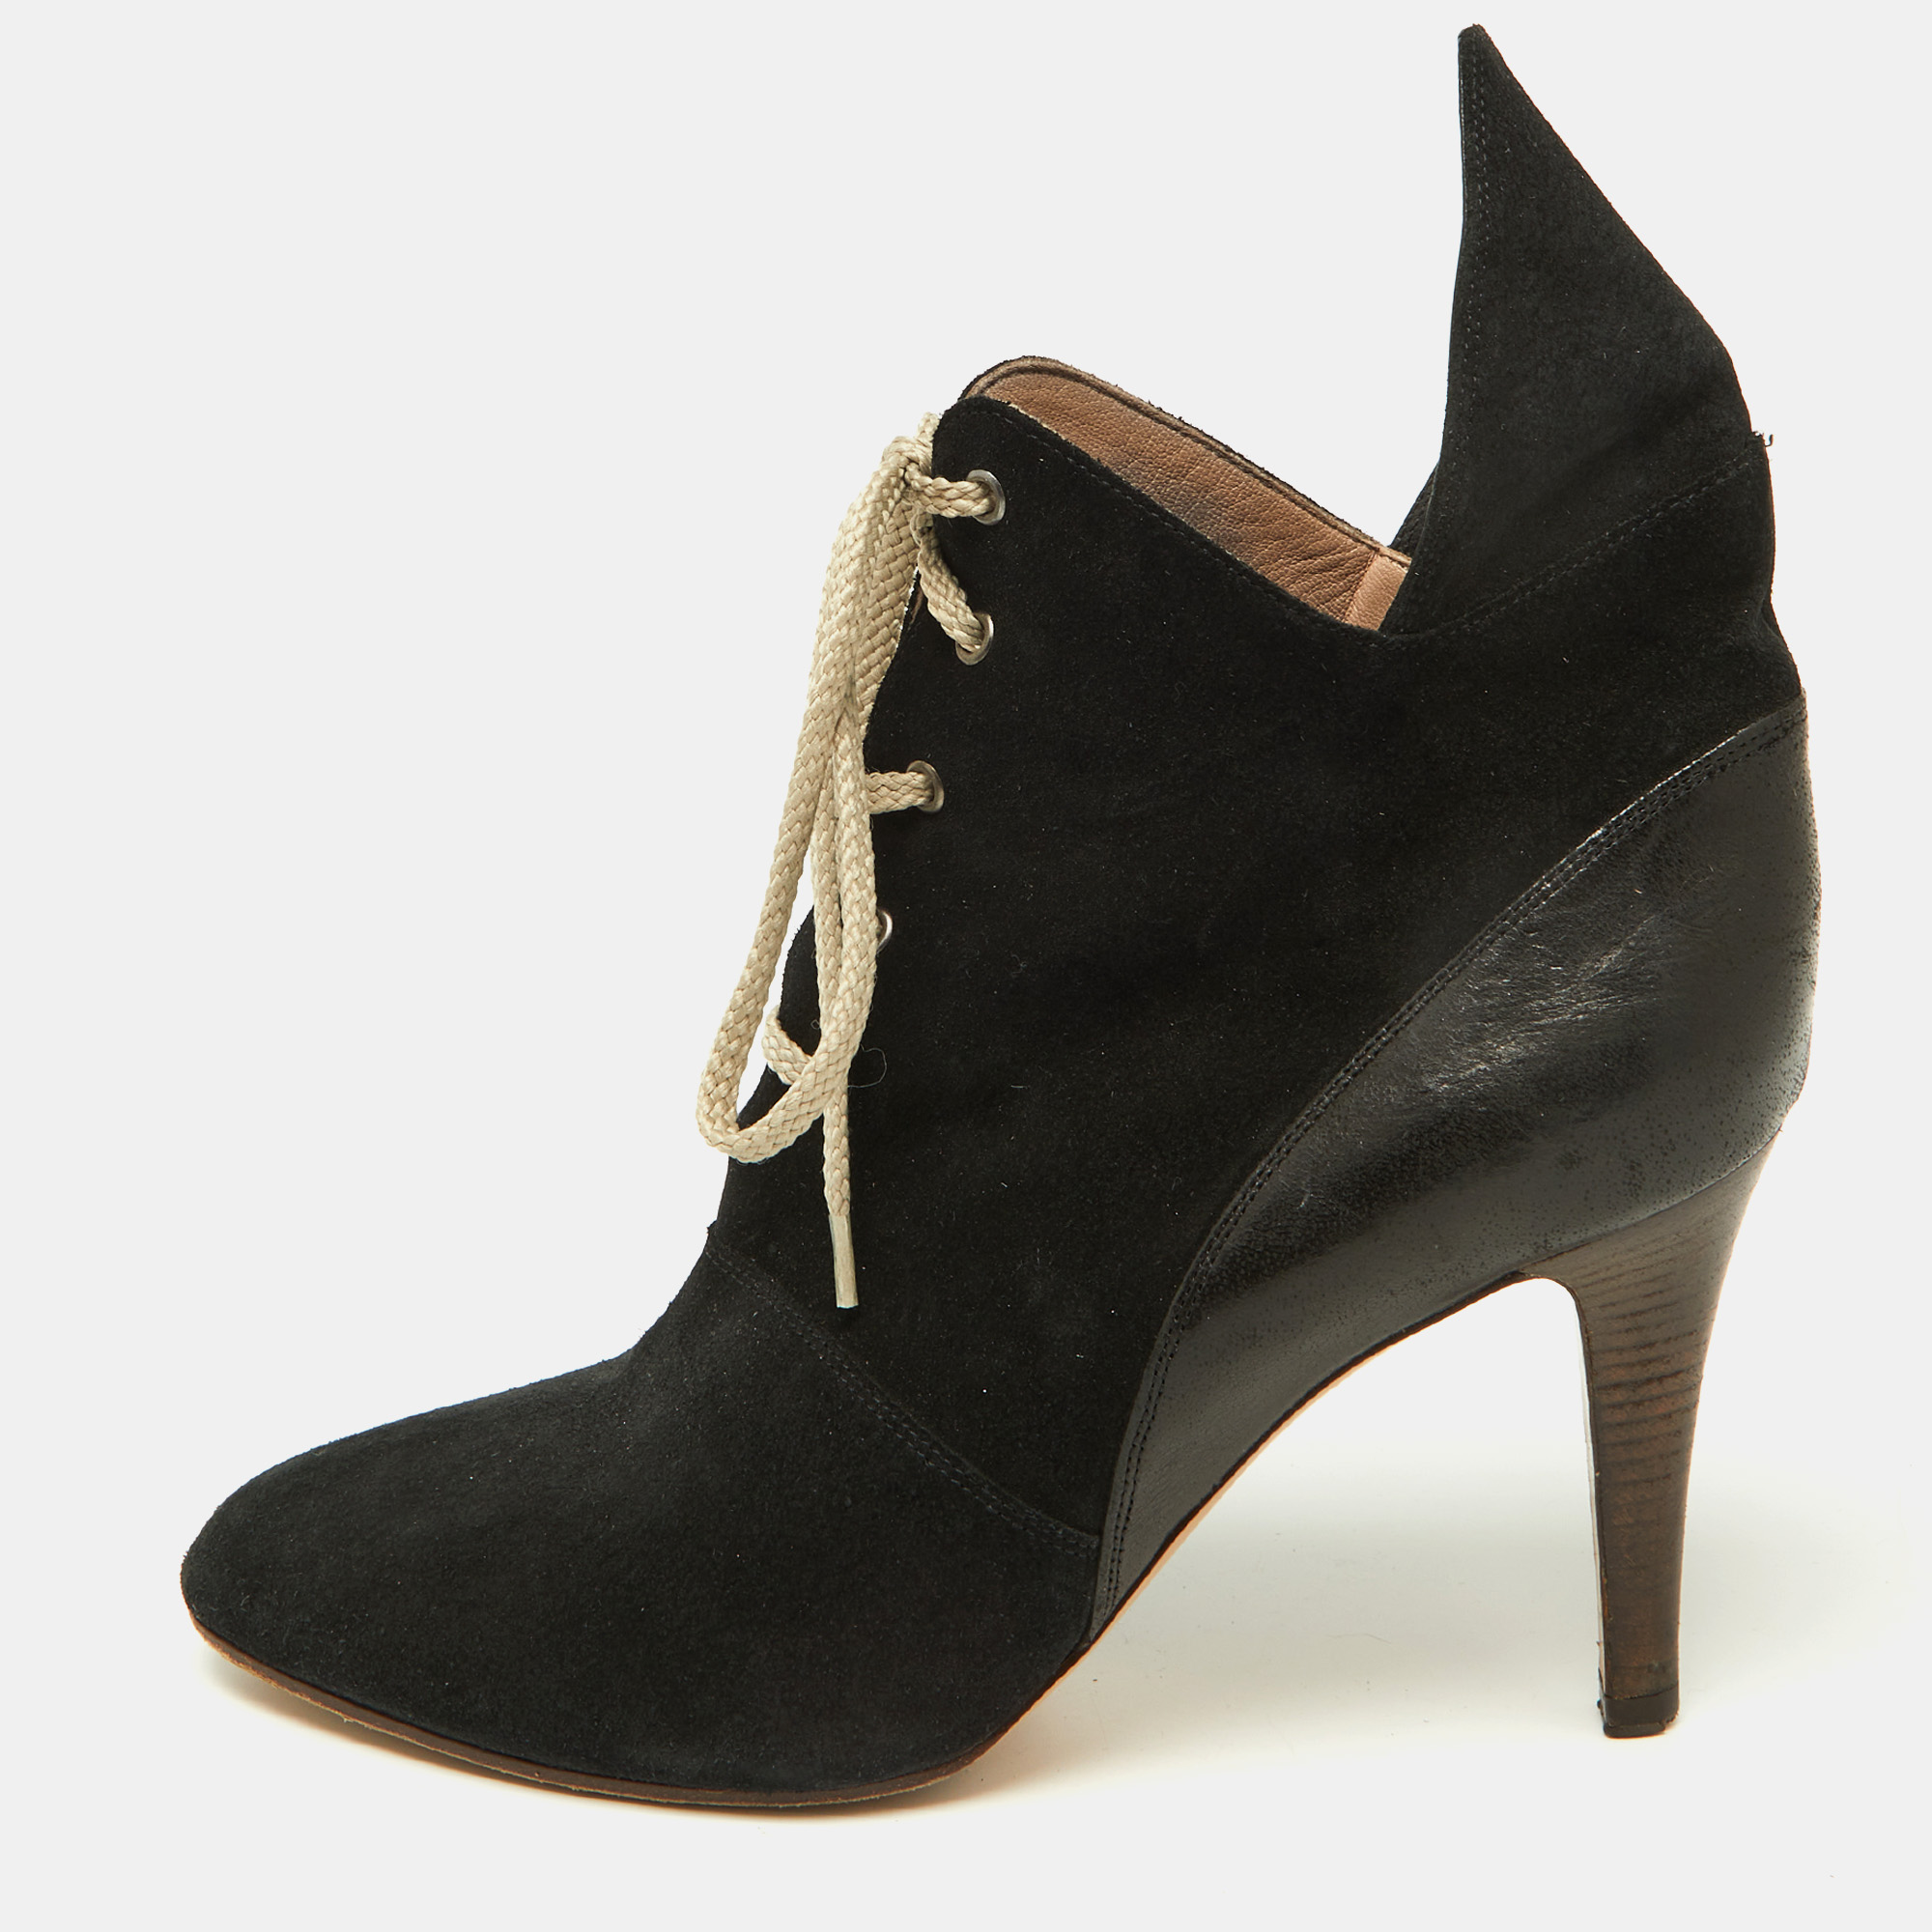 

Chloe Black Suede and Leather Pointed Toe Ankle Booties Size